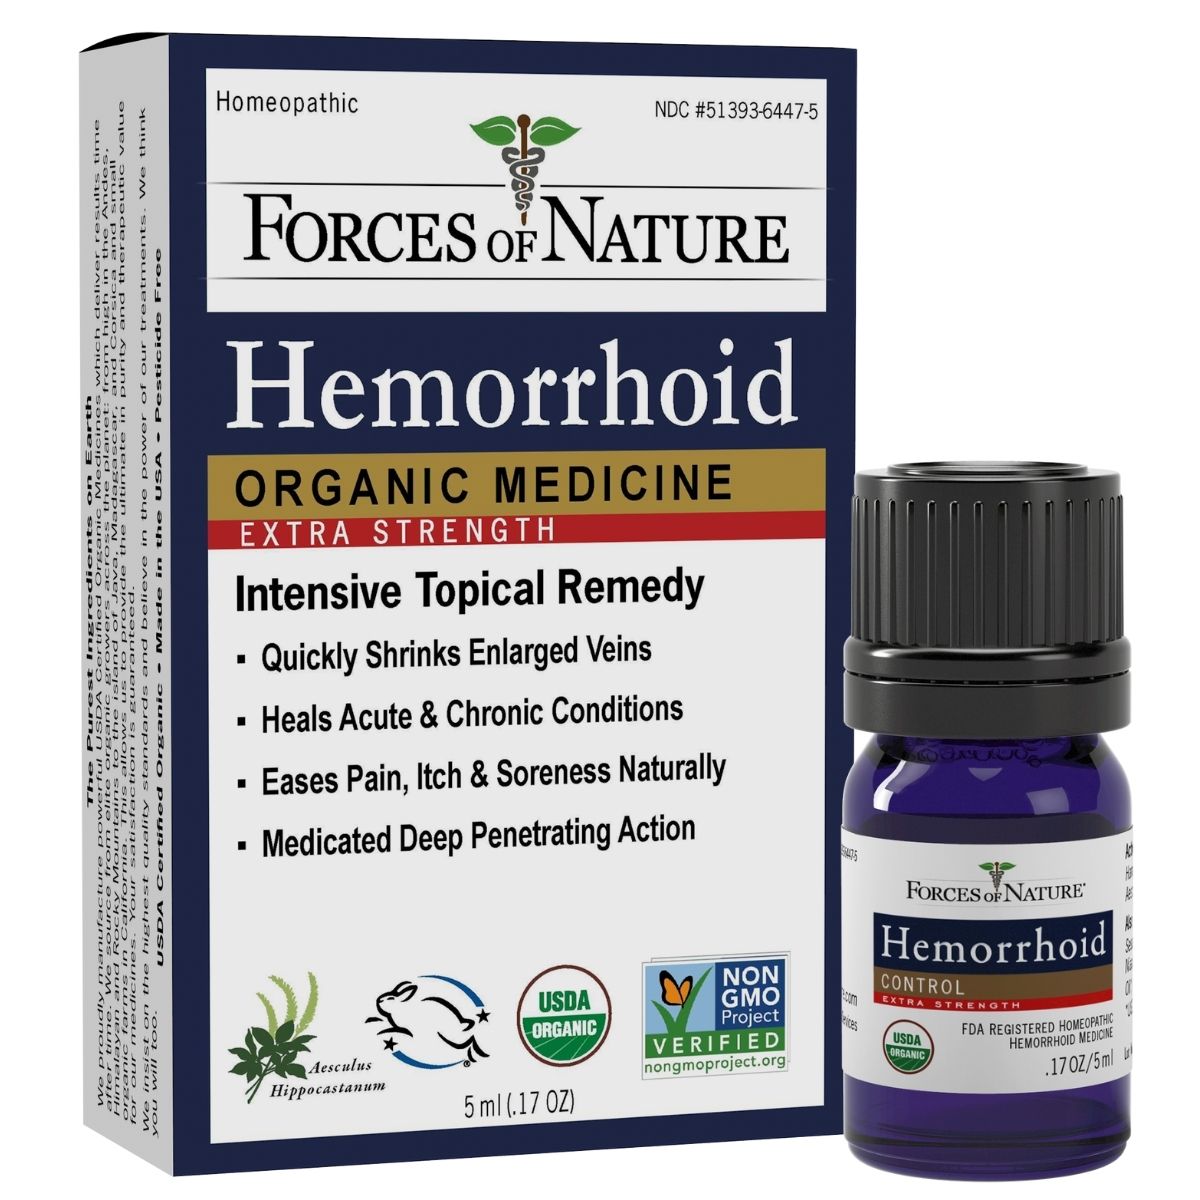 Tired of hemorrhoids? Get fast relief with Hemorrhoid Control Extra Strength! An all-natural, homeopathic remedy essential oil for inflammation & pain relief.